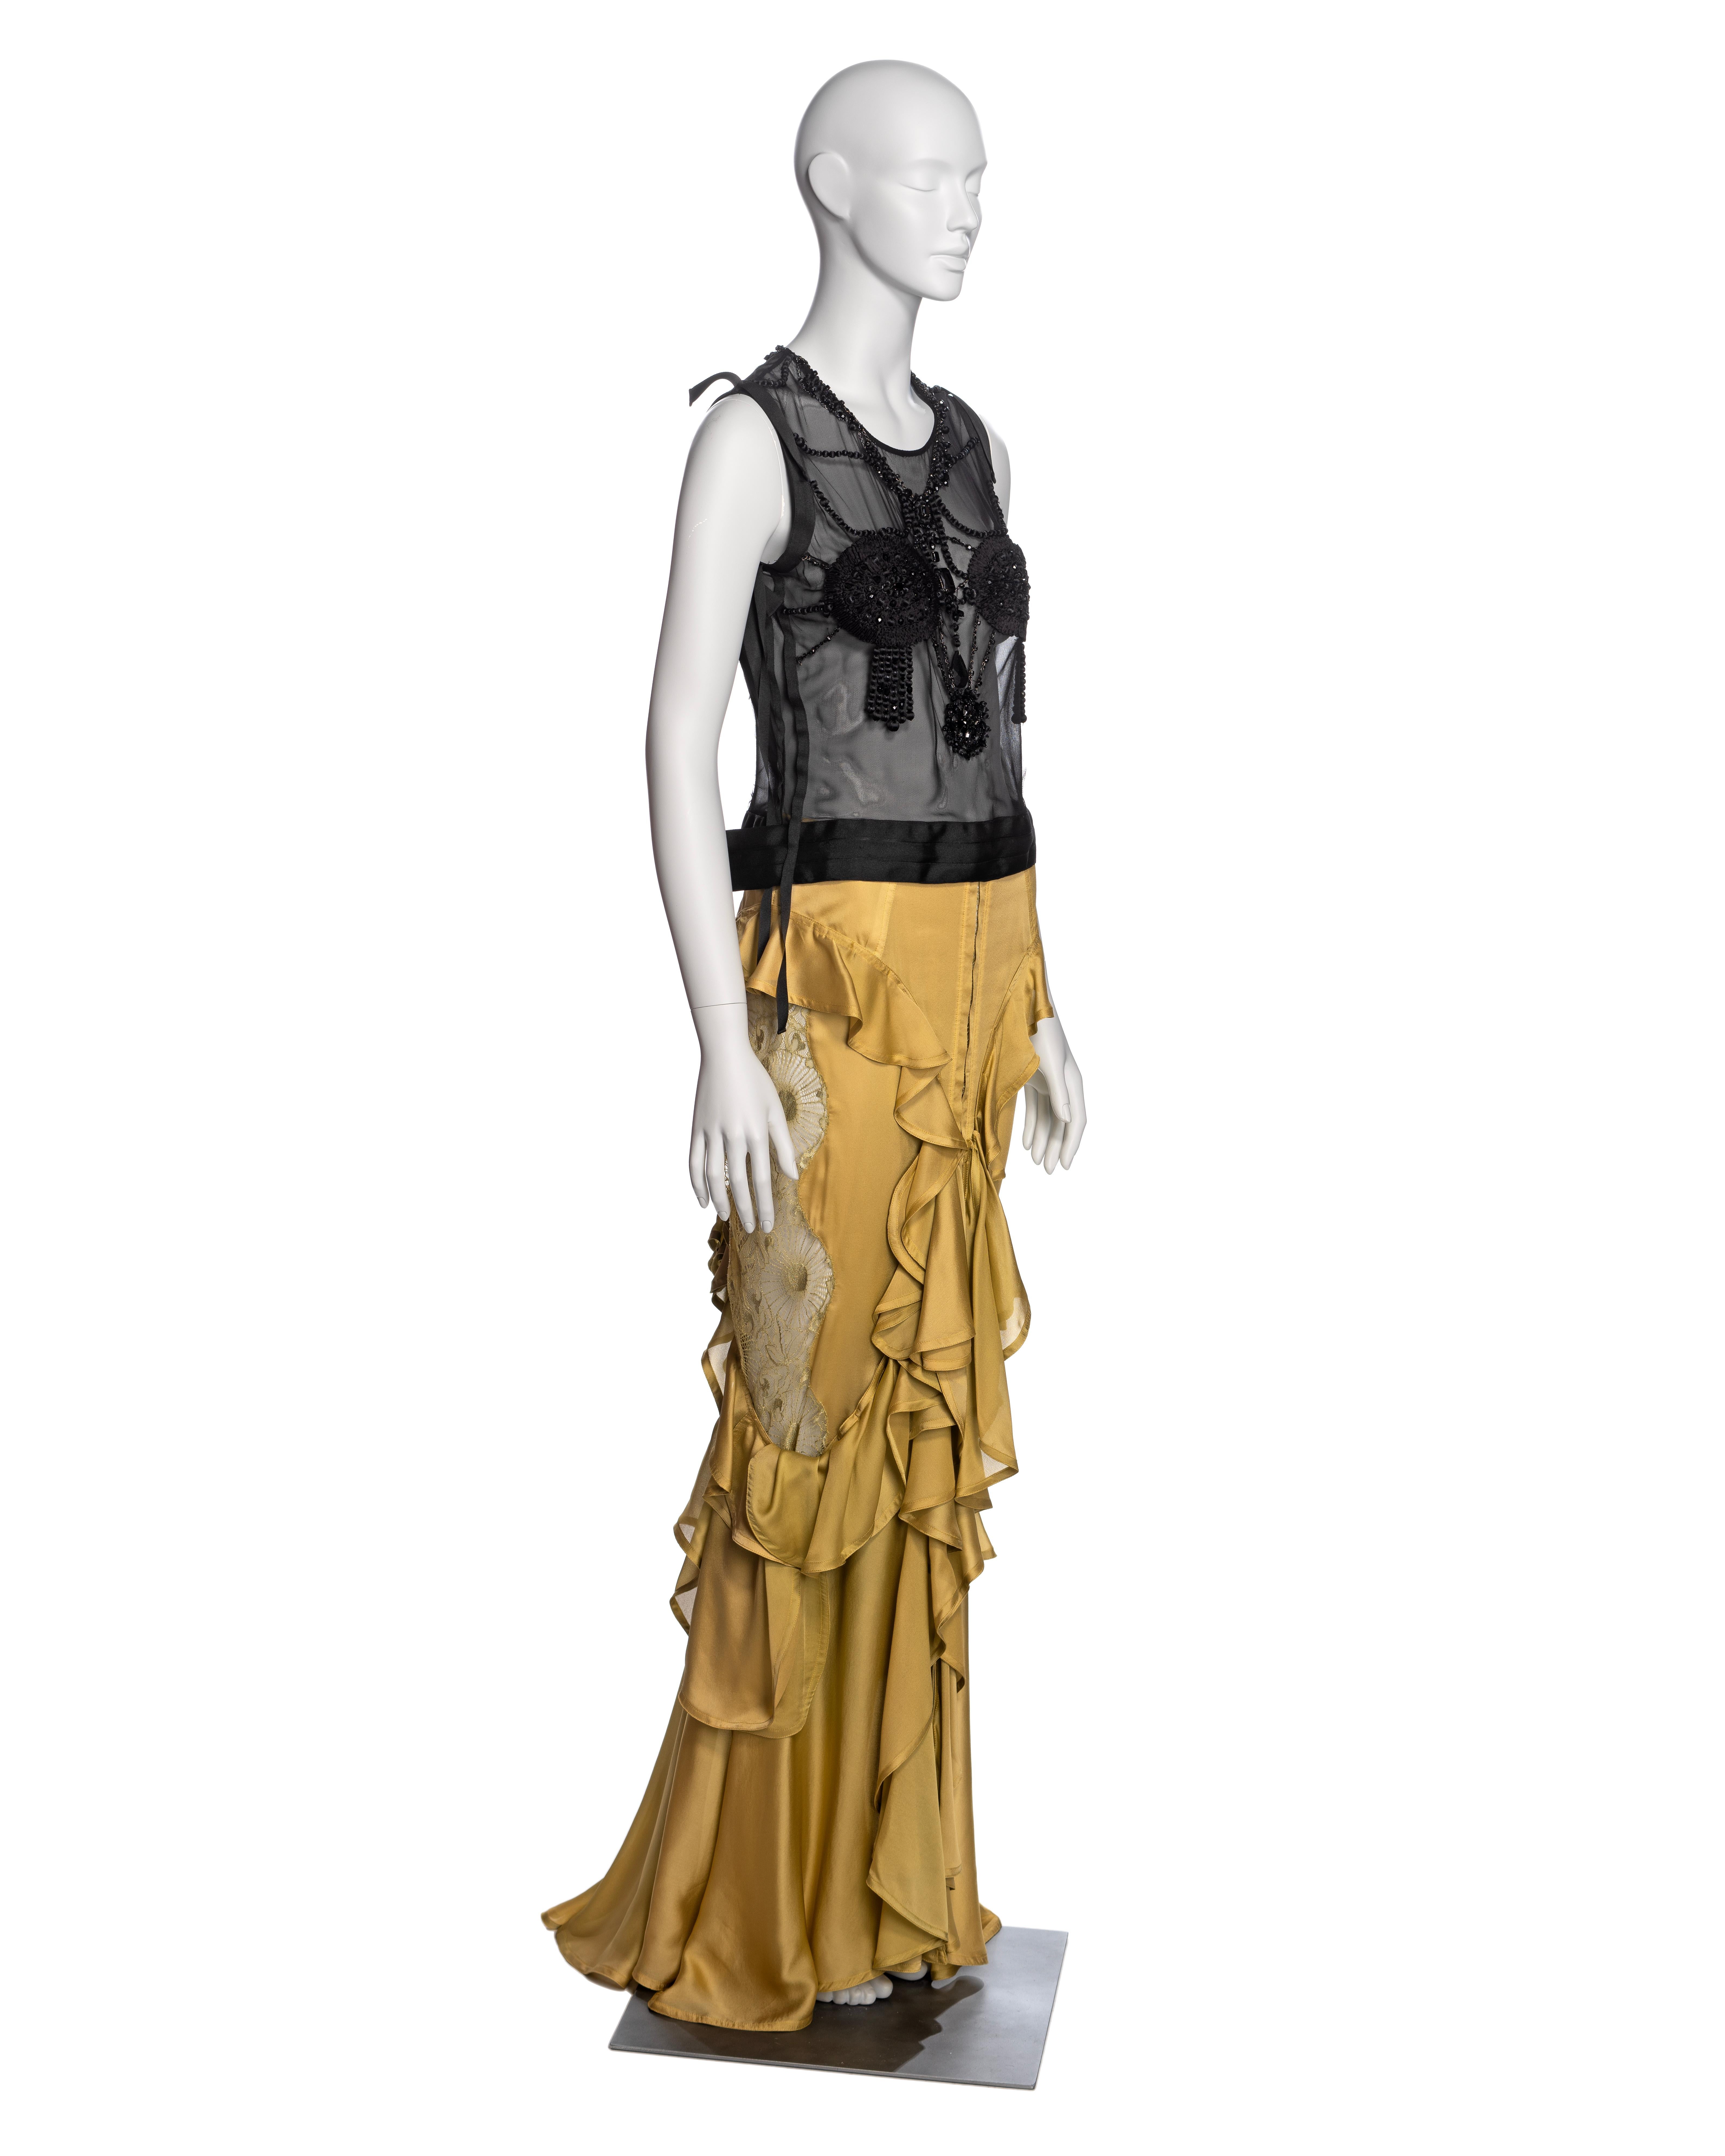 Yves Saint Laurent by Tom Ford Embellished Top and Silk Skirt Ensemble, FW 2003 3